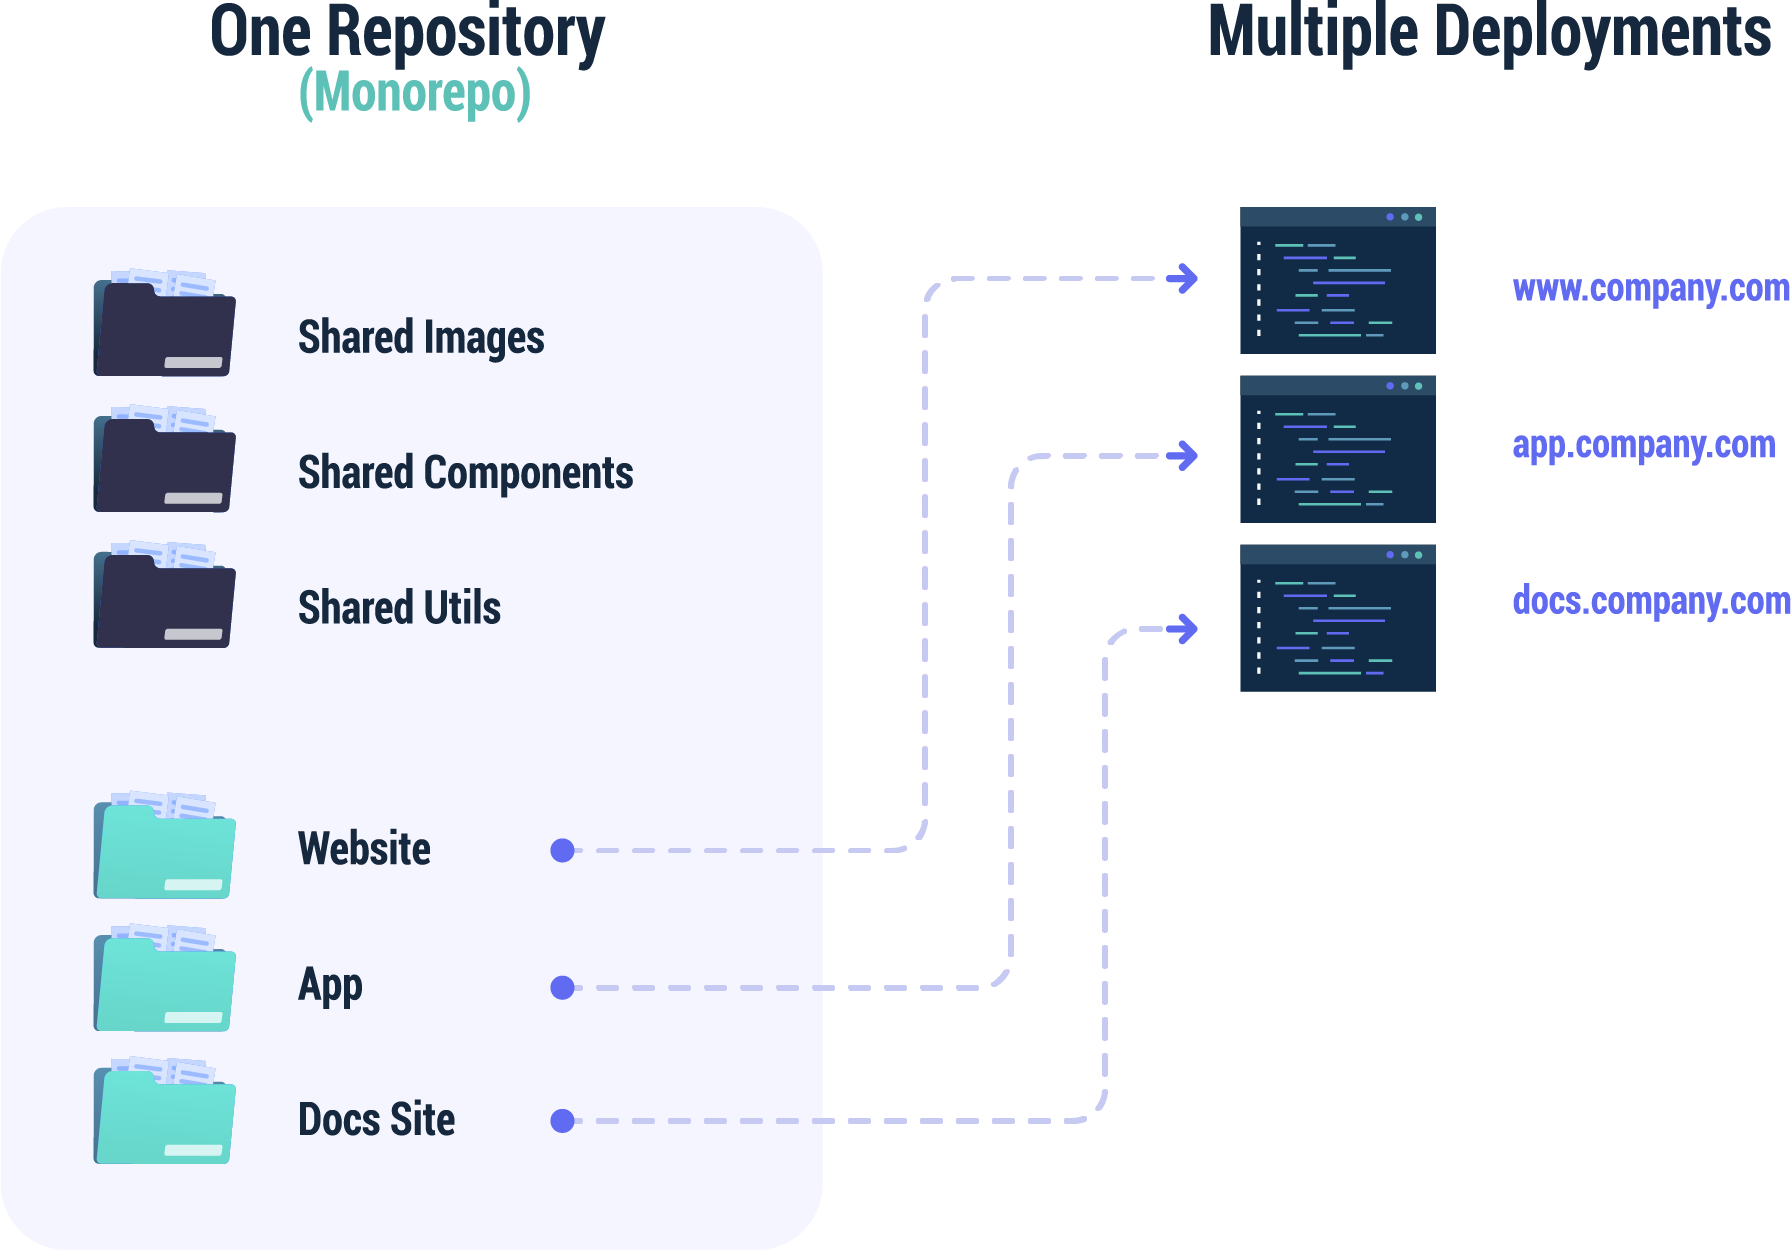 Diagram shows how one monorepo can be used to deploy multiple websites or apps